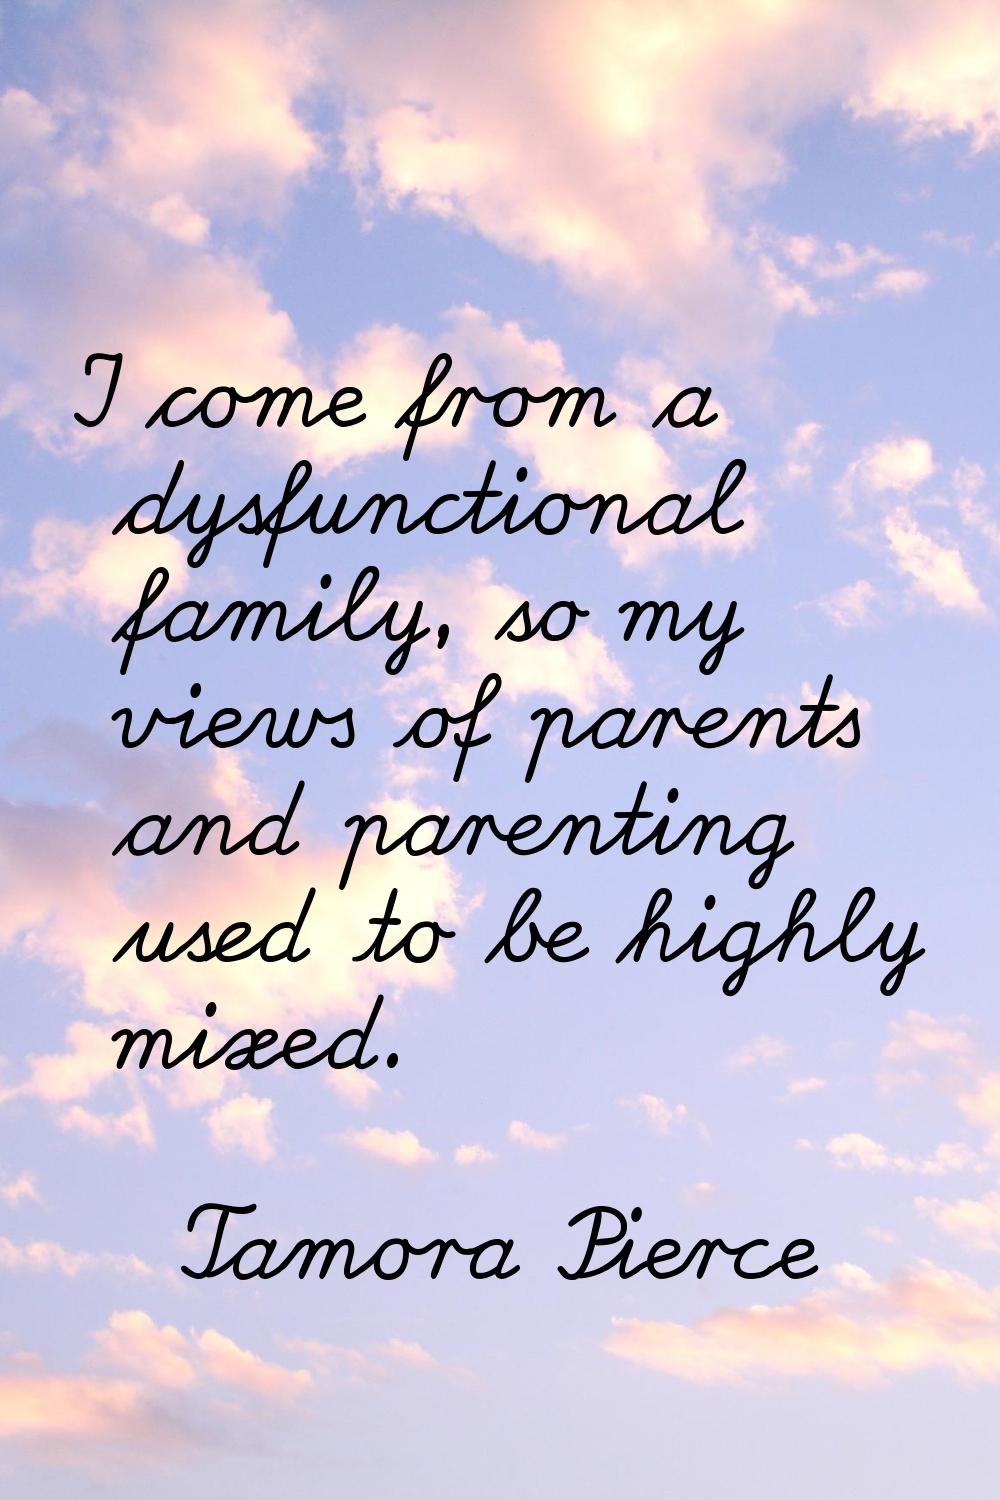 I come from a dysfunctional family, so my views of parents and parenting used to be highly mixed.